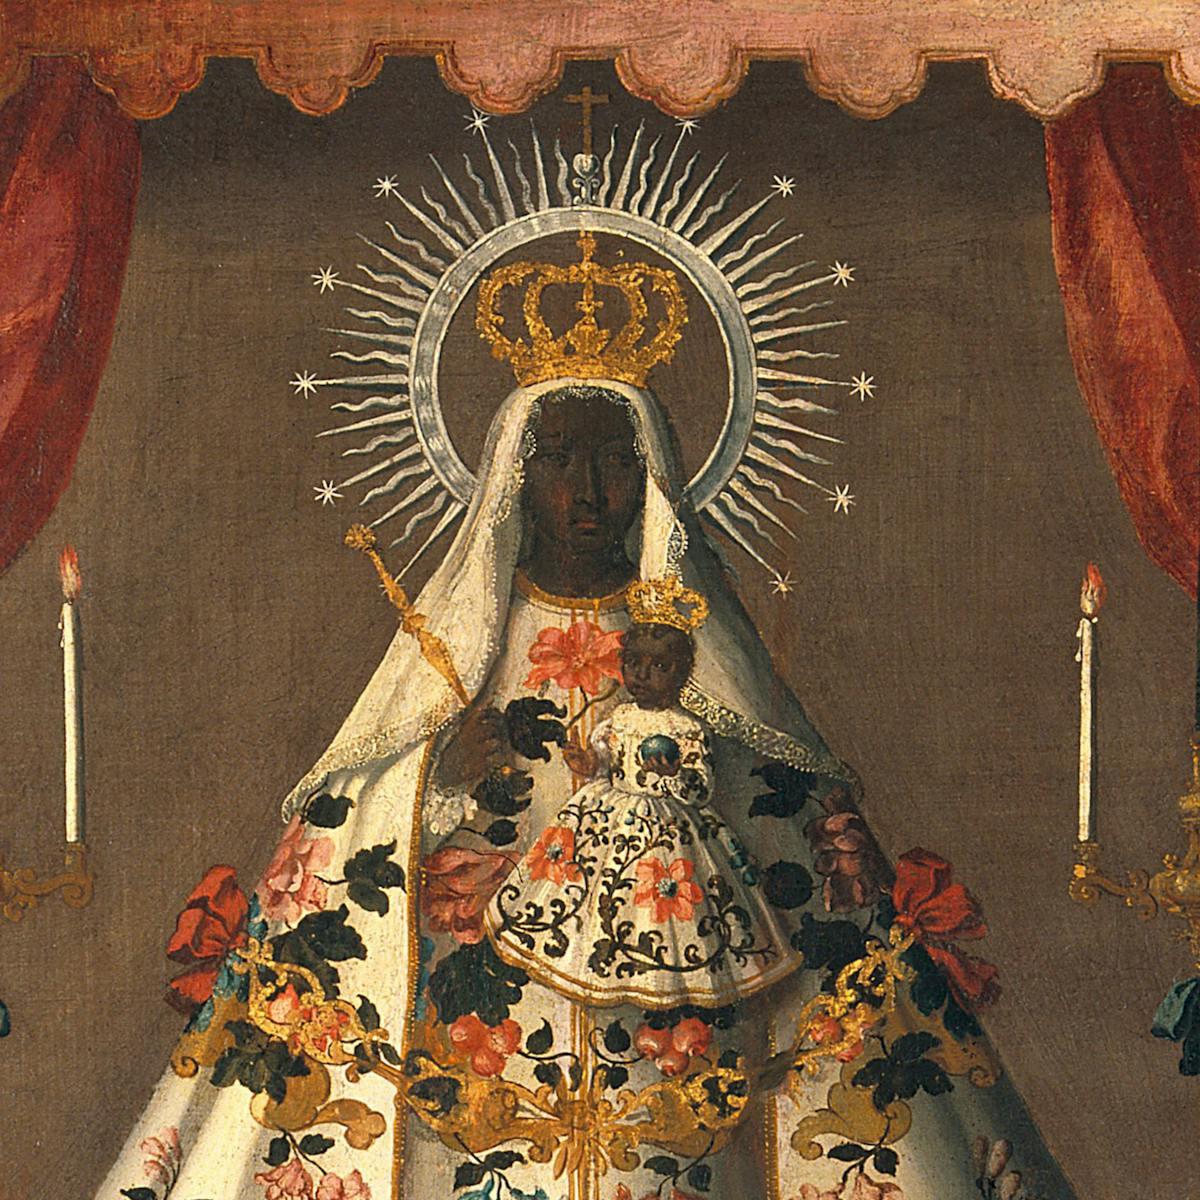 Painting of Our Virgin and Child of Guadalupe displayed in Medicine Man Gallery, bought by Henry Wellcome before 1936, the year of his death